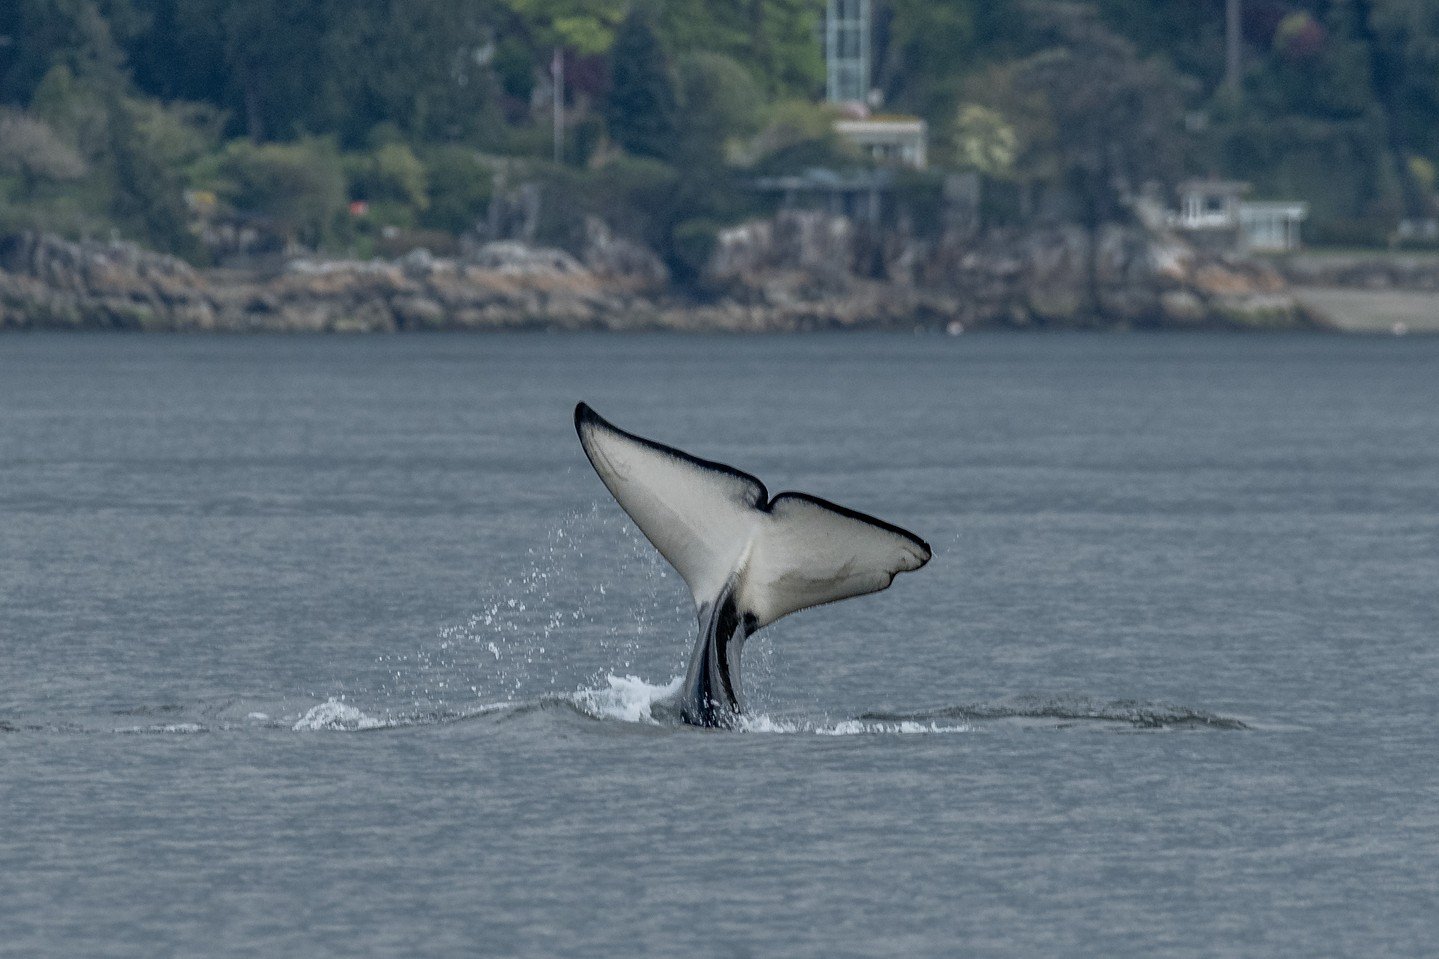 Do you notice anything interesting about T124A2A Agafia's tail?

He's missing the right edge of his tail fluke! 

If you look closely there are lots of deep scars in that area, likely meaning that this whale didn't have this deformity naturally, but 